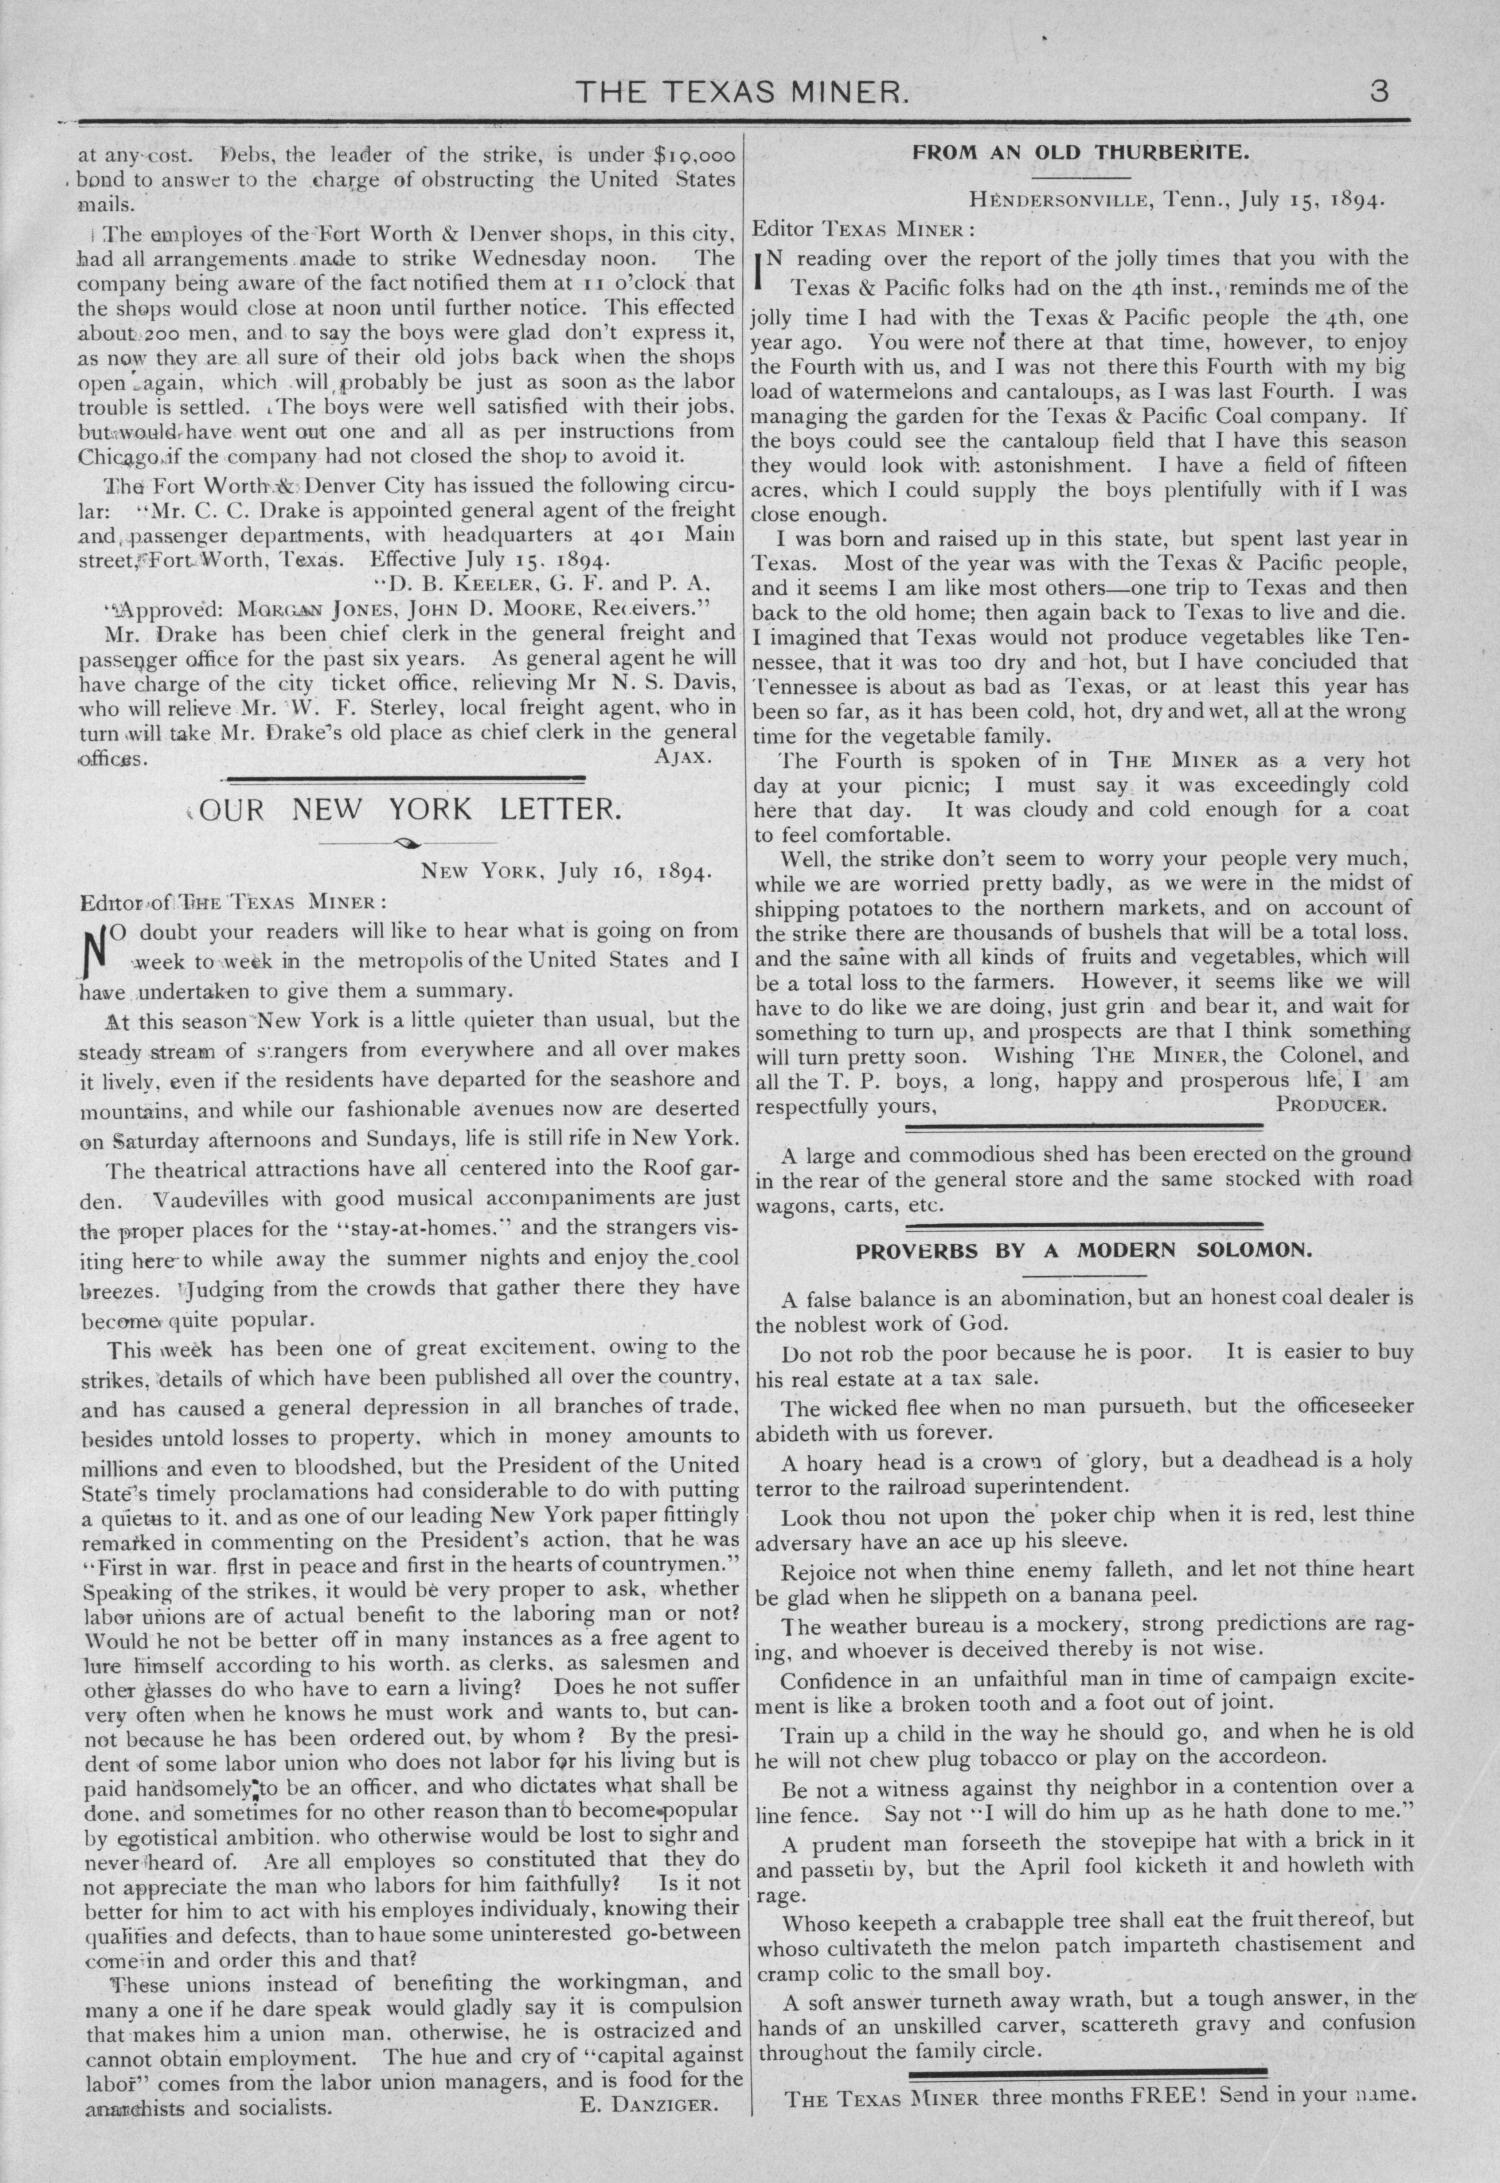 The Texas Miner, Volume 1, Number 27, July 21, 1894
                                                
                                                    3
                                                